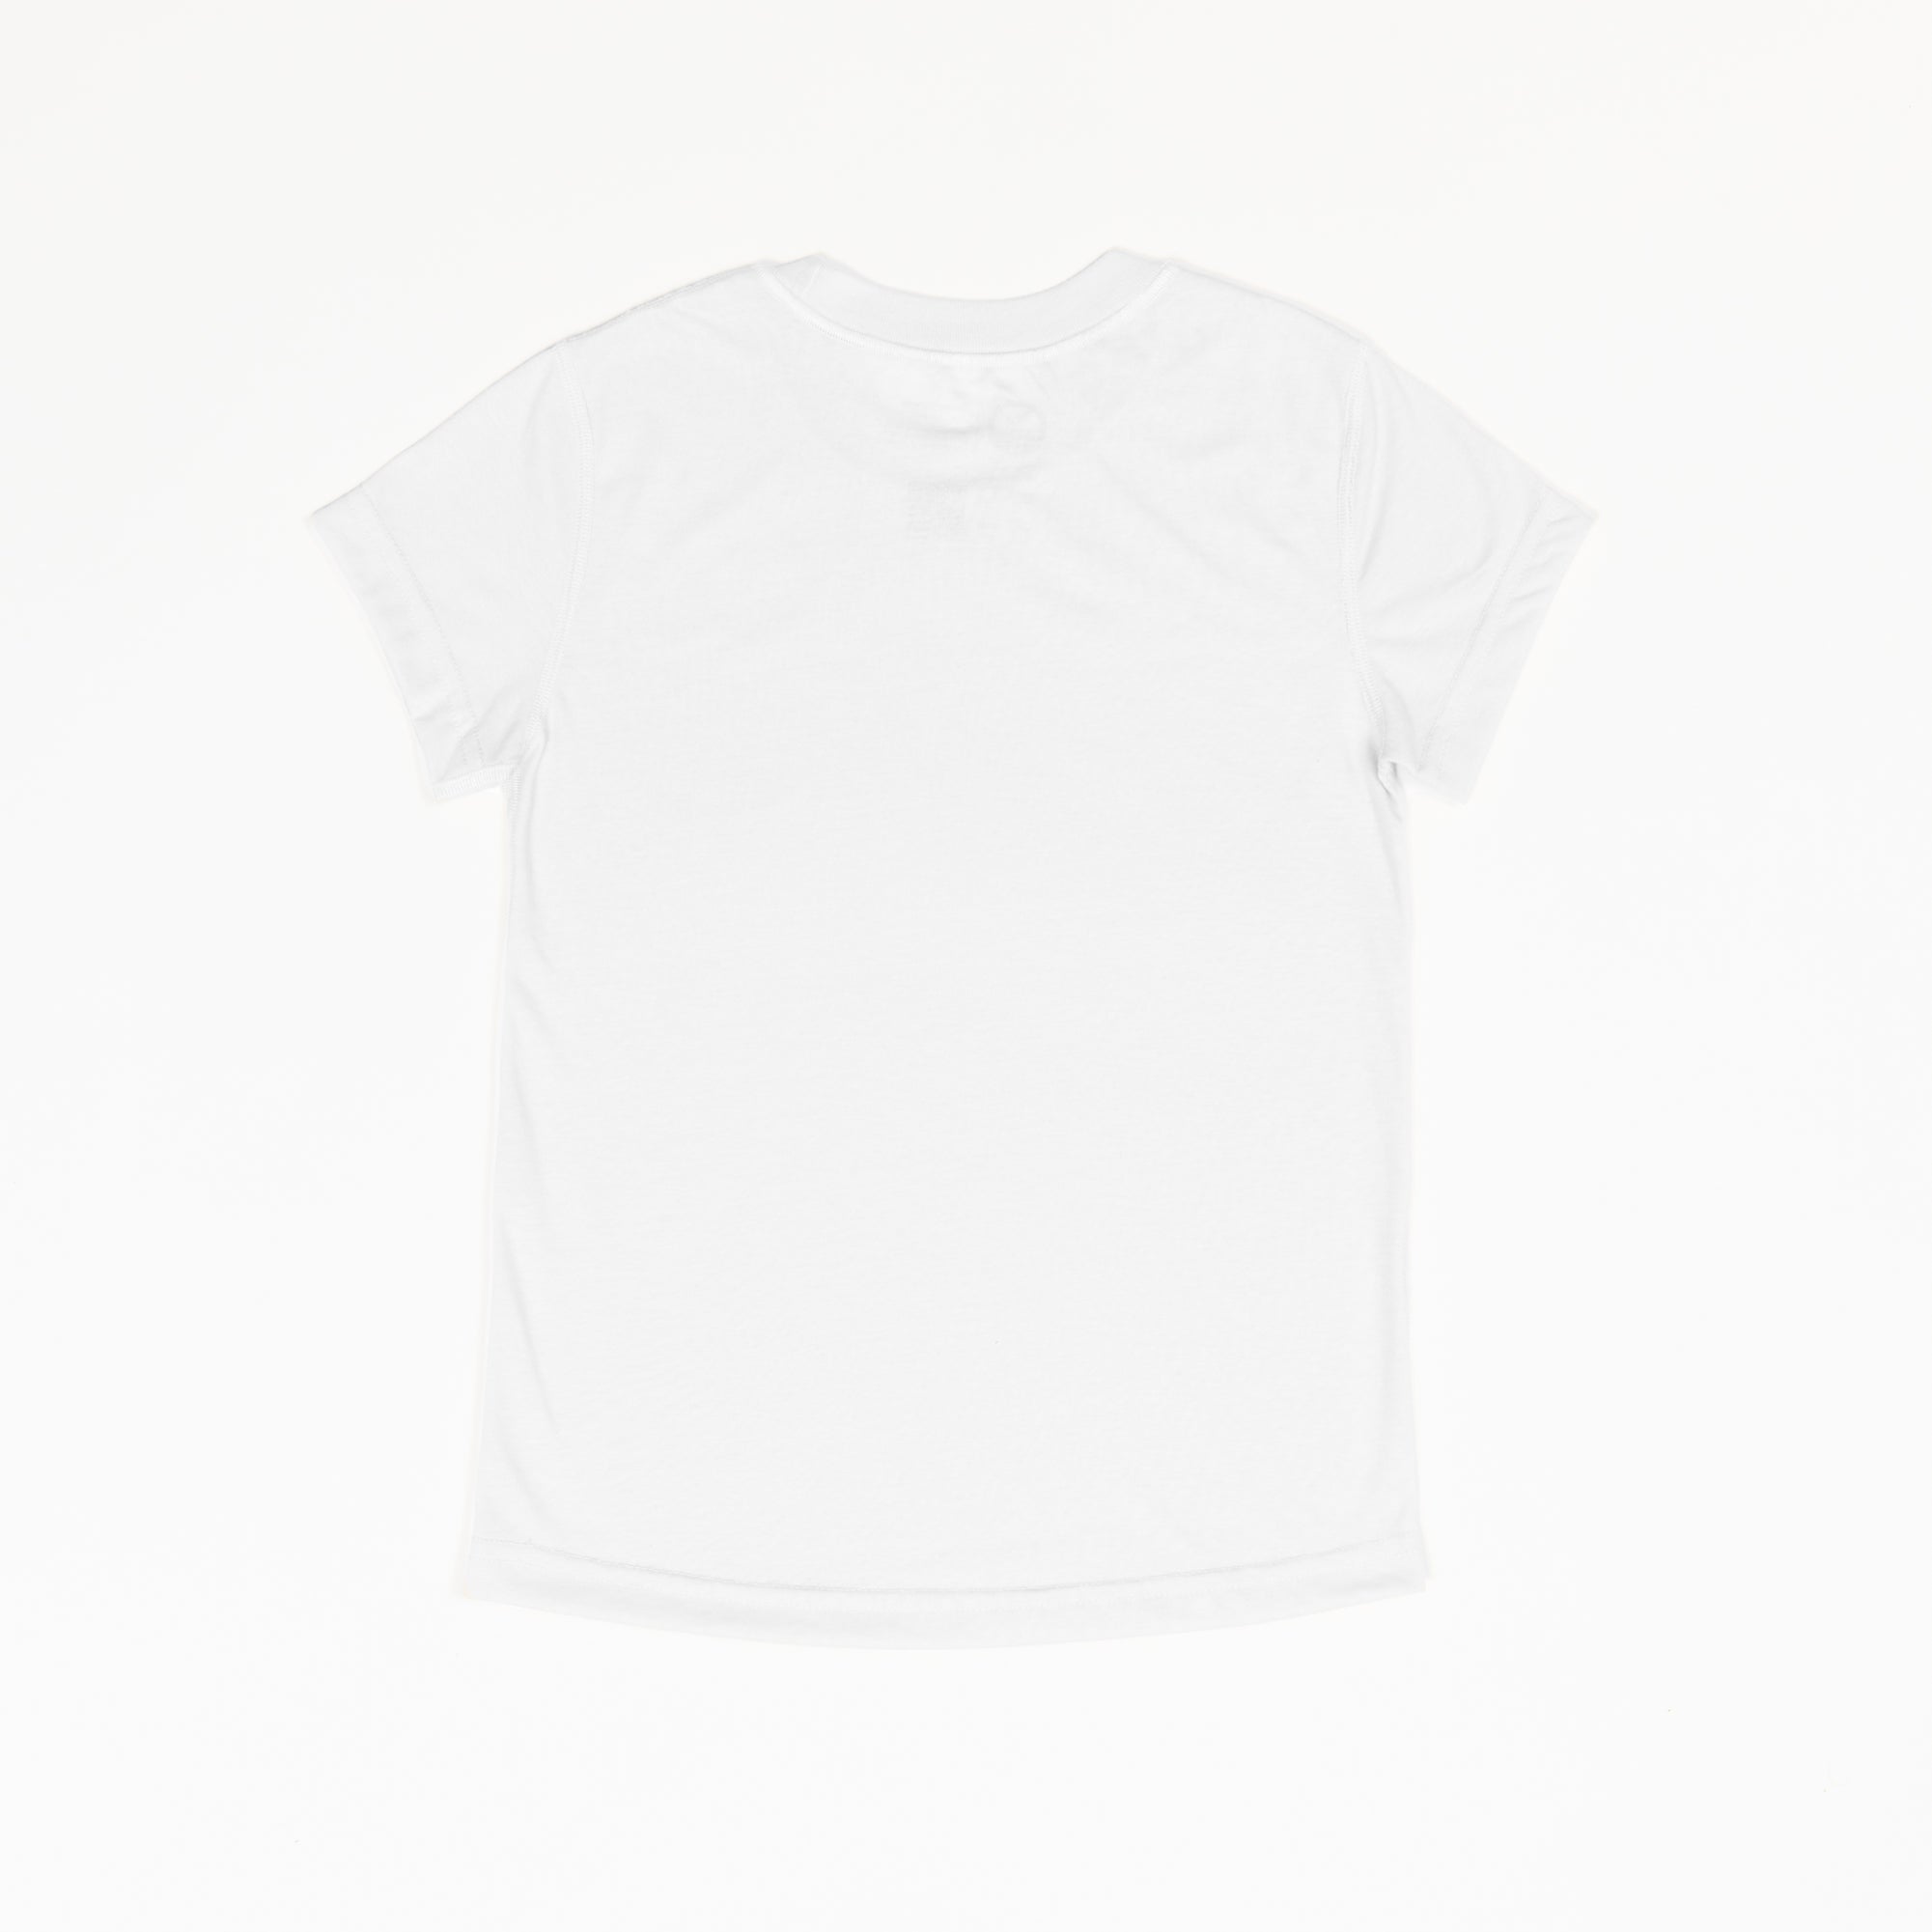 A white basic crewneck t-shirt that is laid flat on a white background.